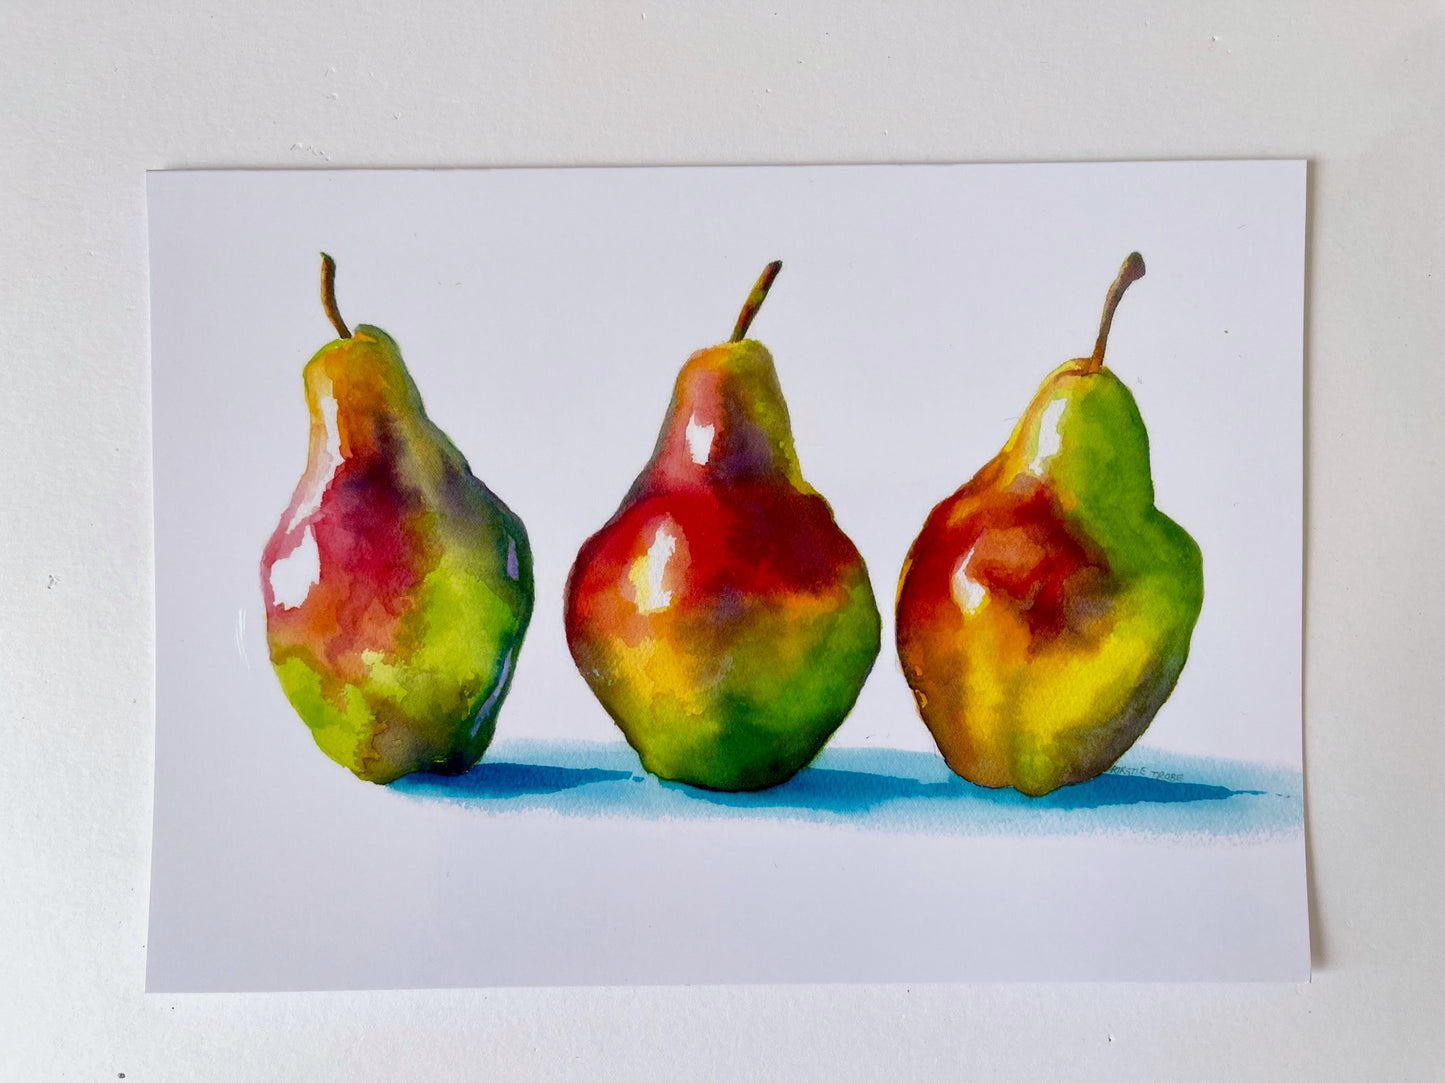 A trio of pears stand in a row, alongside each other. They are brightly coloured in greens, reds, yellows and purples and painted in a stylised manner so the colours bleed into each other. The shadows cast are depicted in a vibrant turquoise blue.